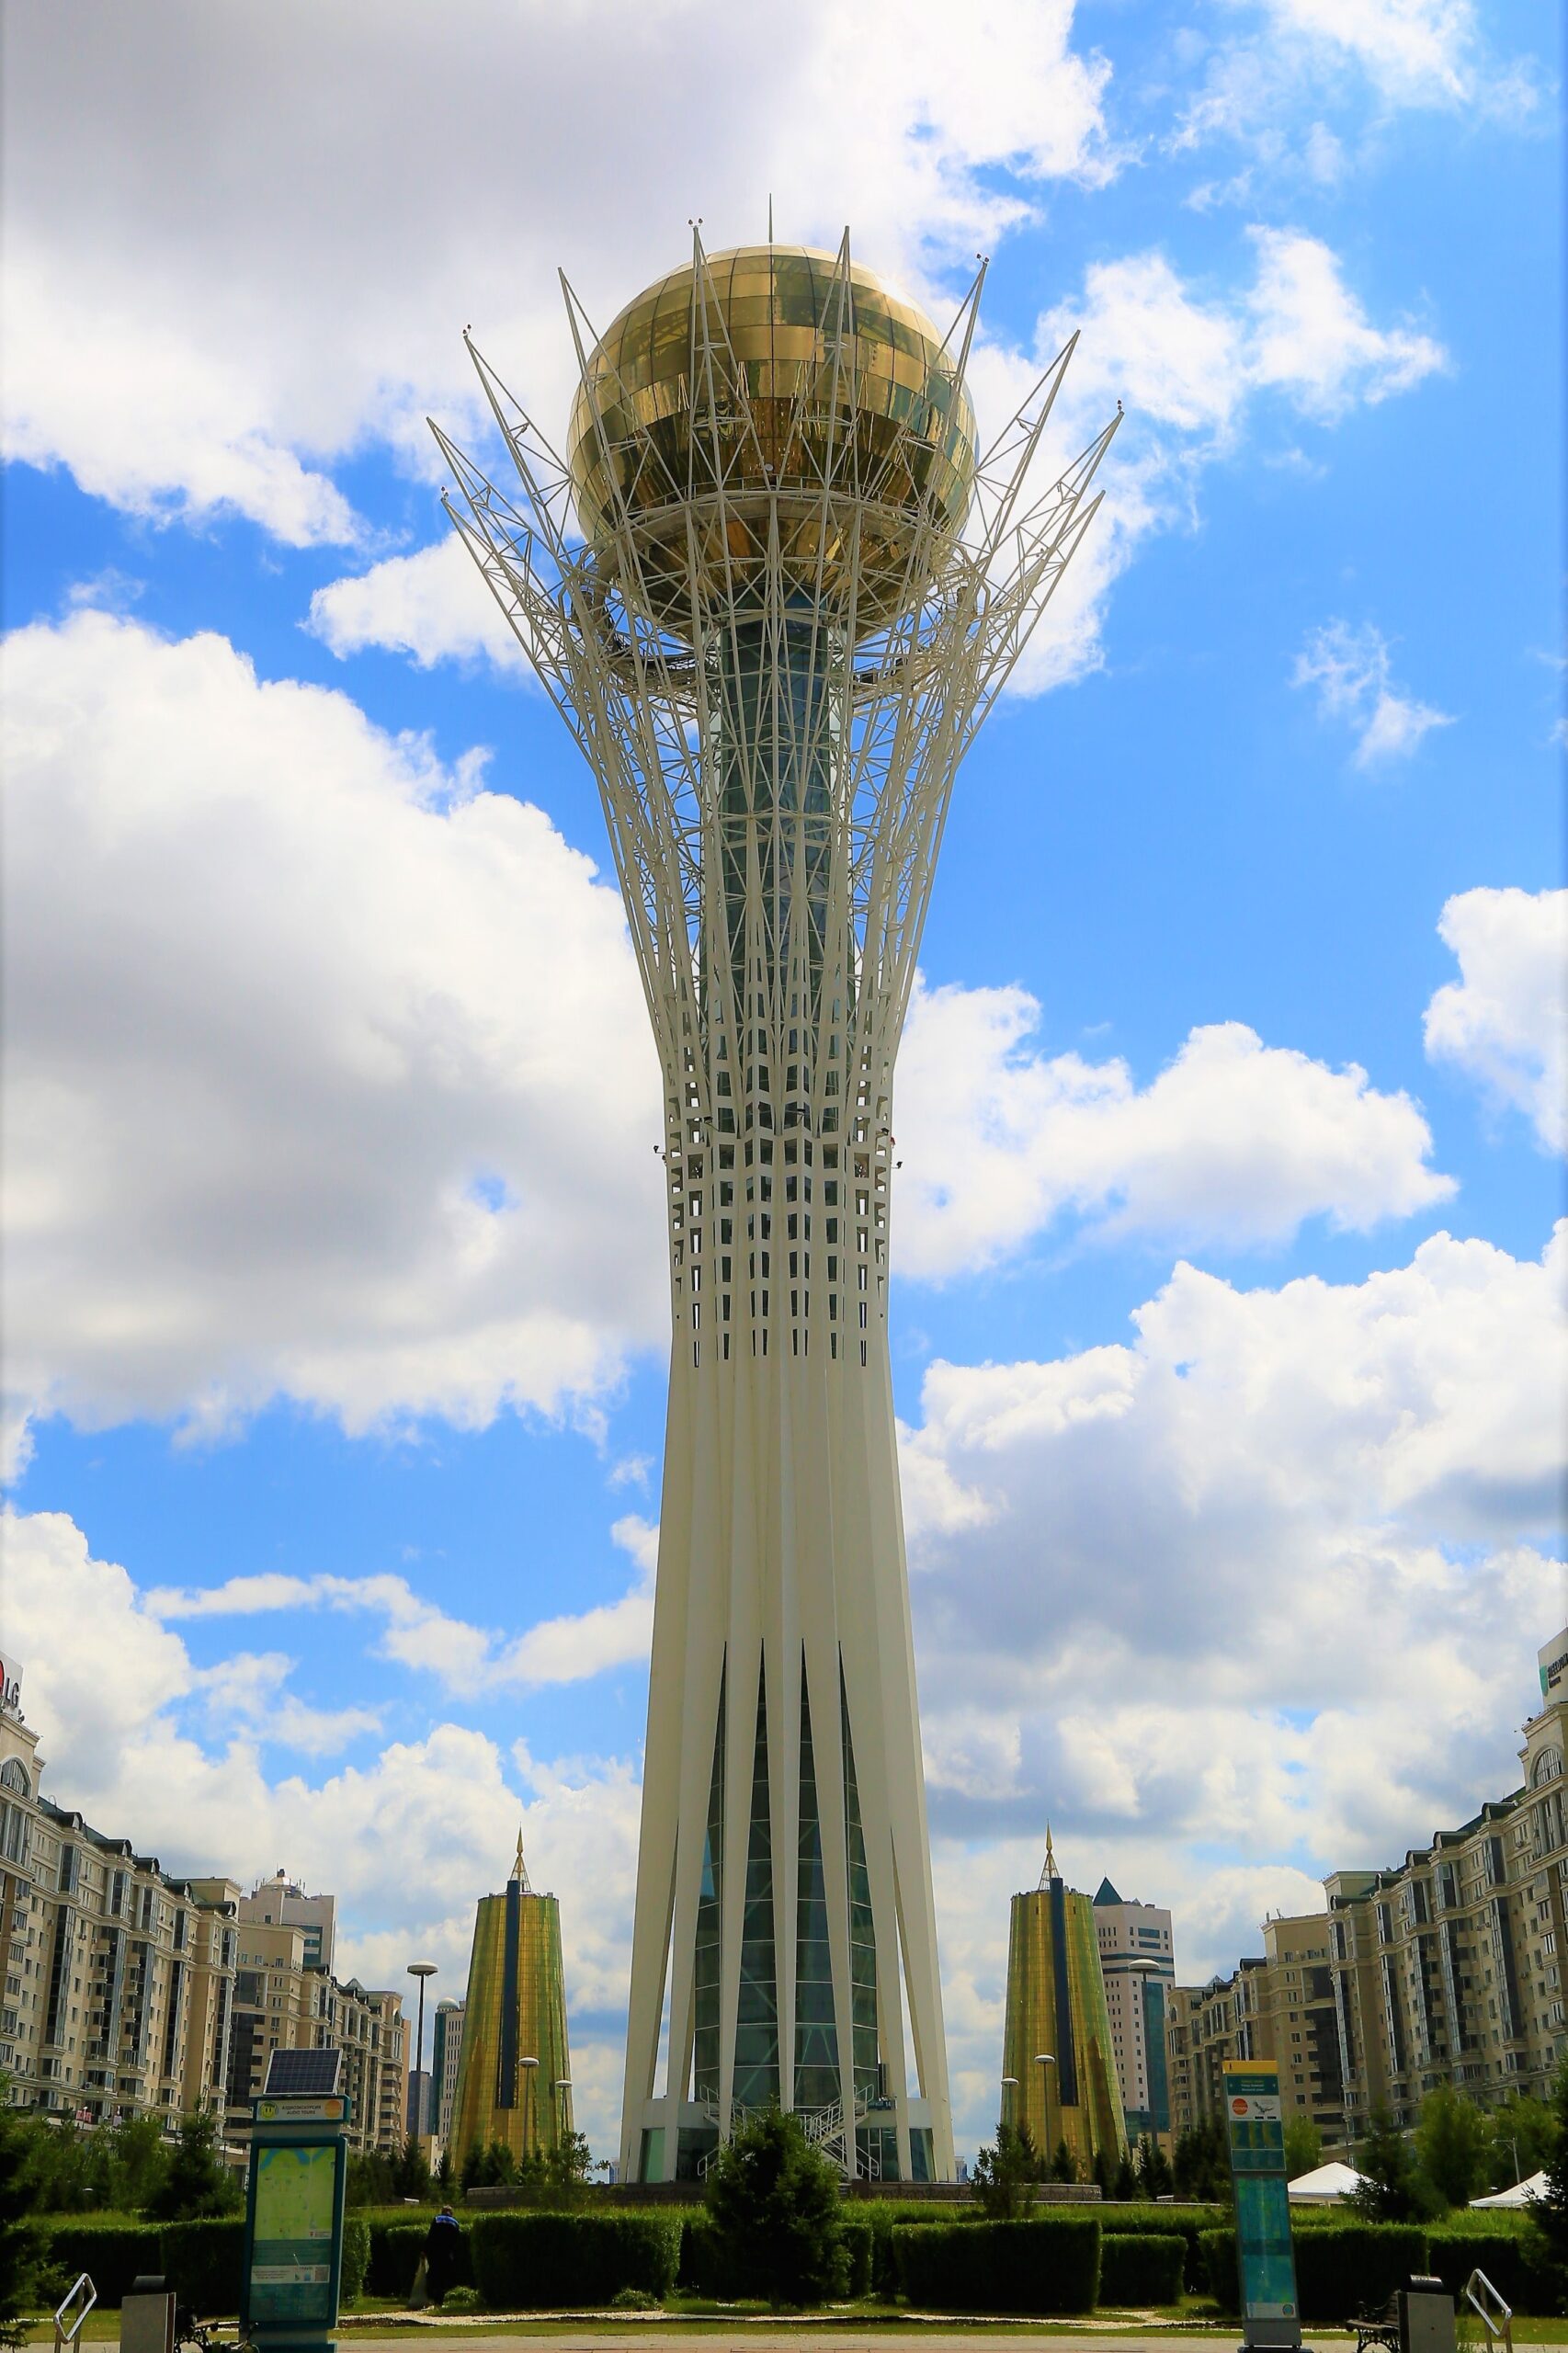 A photograph of the Baiterek monument and observation tower in Nur-Sultan, Kazakhstan. The monument is surrounded by buildings and behind it is a blue sky with clouds.